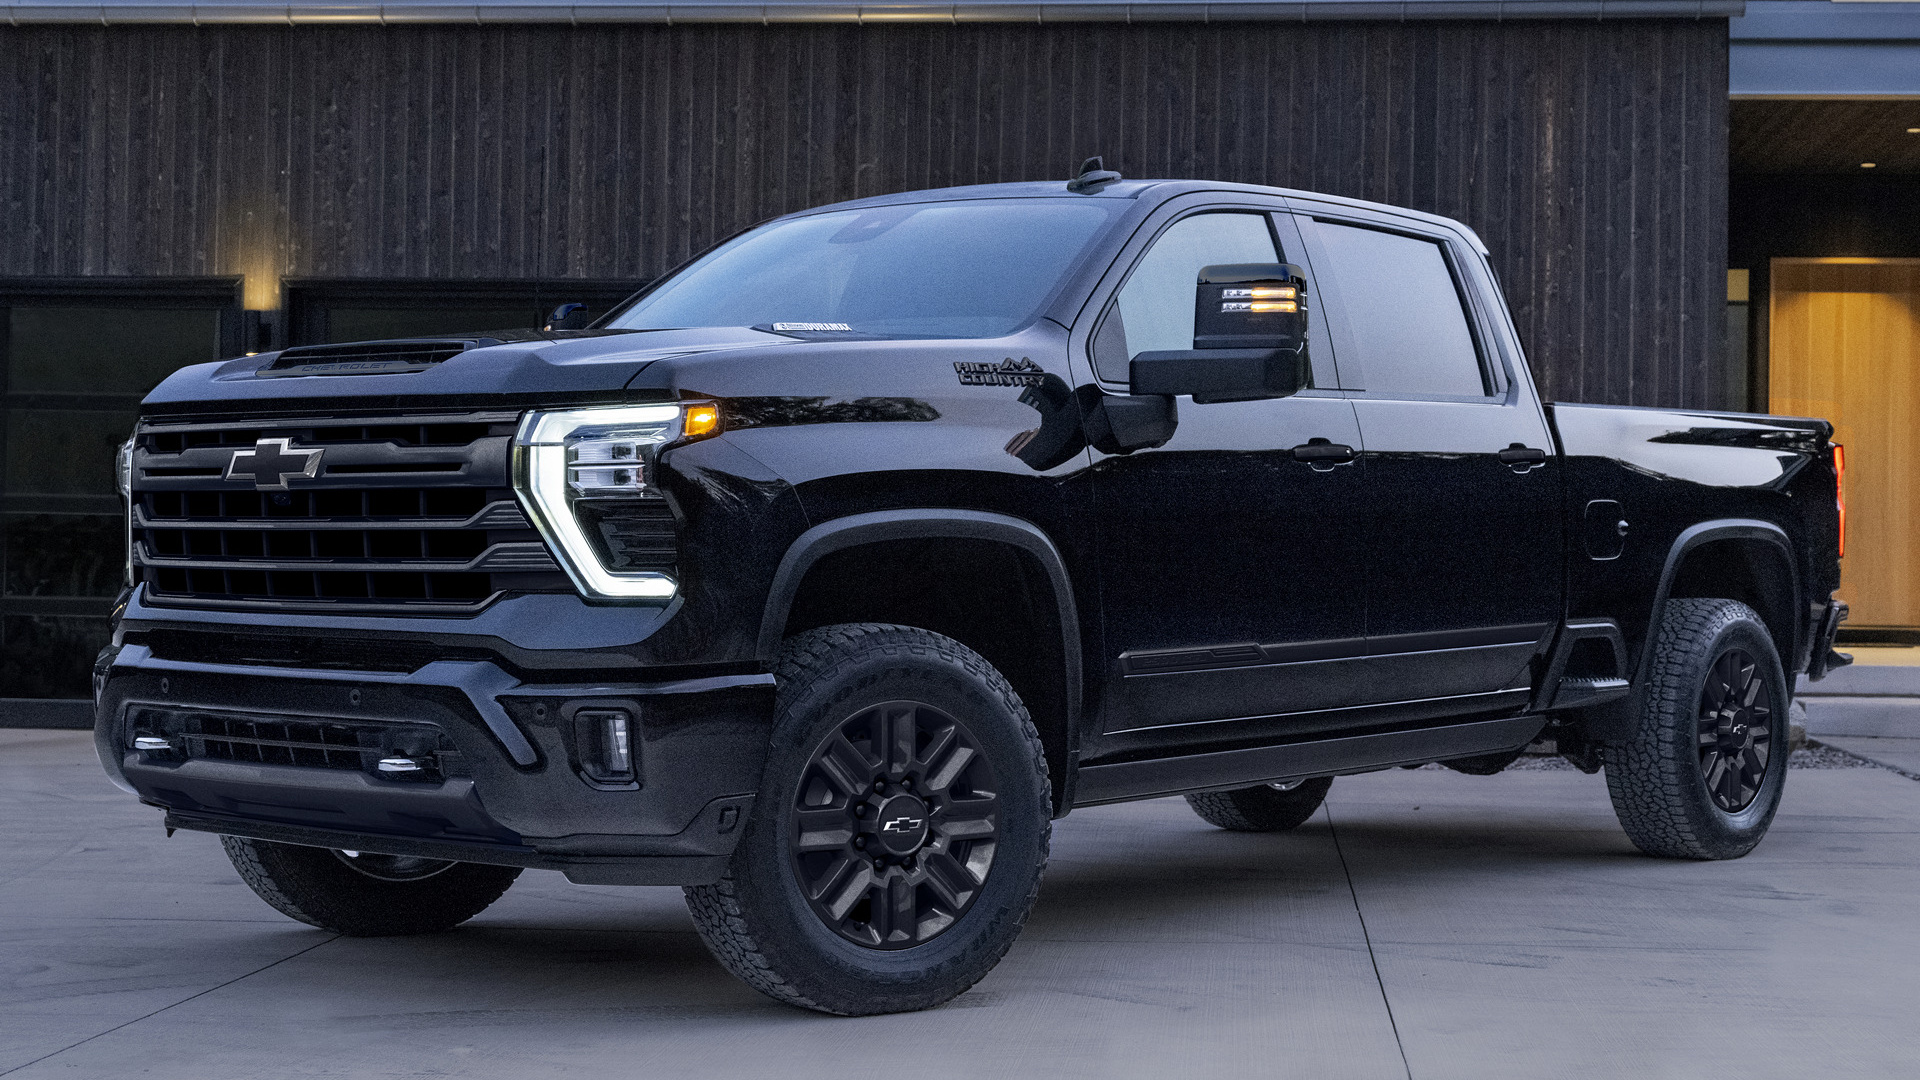 2020 Chevy Silverado HD is decent, but Ford and Ram have it beat, review